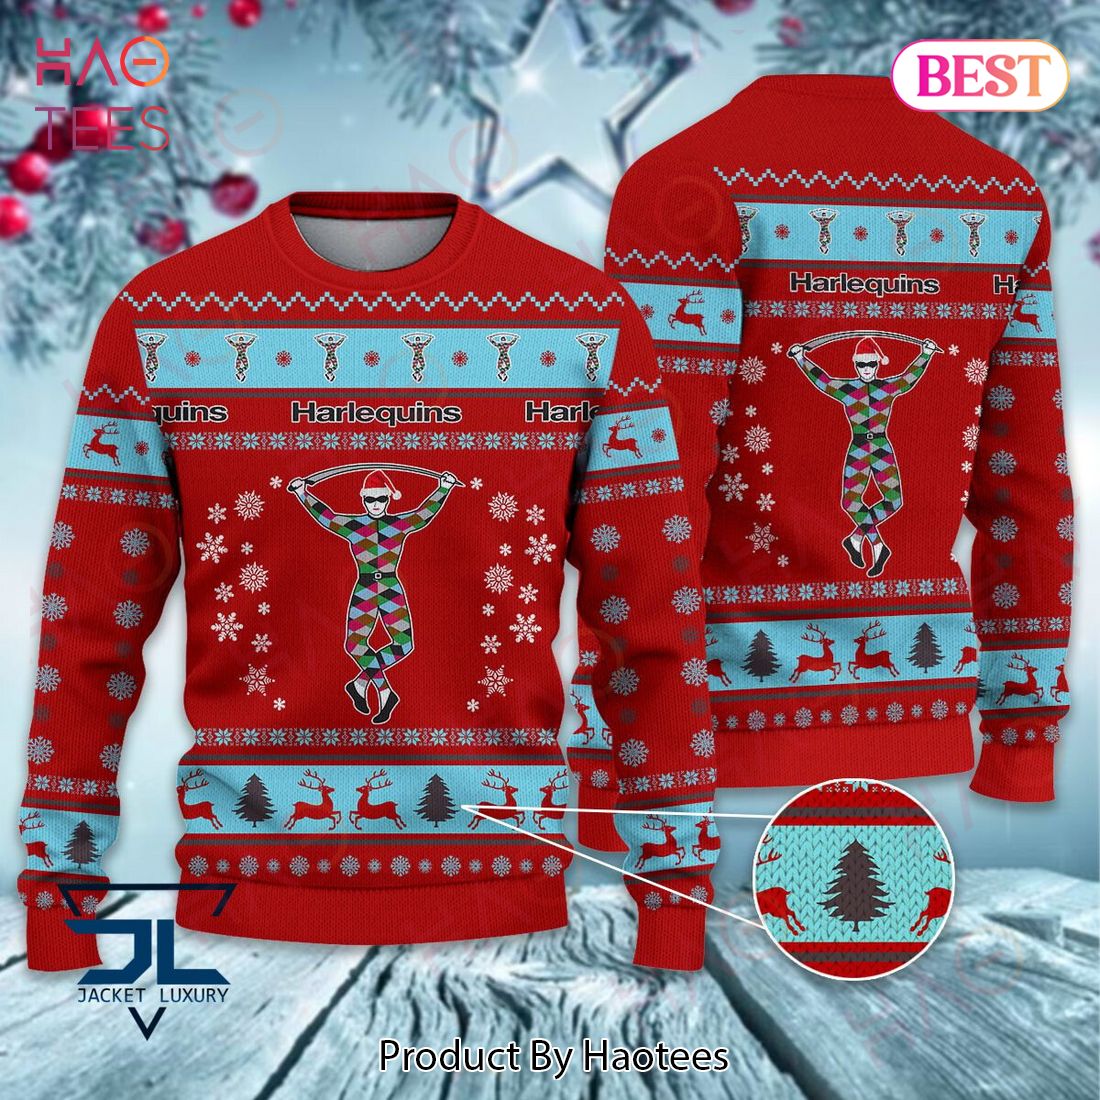 HOT Harlequins Christmas Luxury Brand Sweater Limited Edition